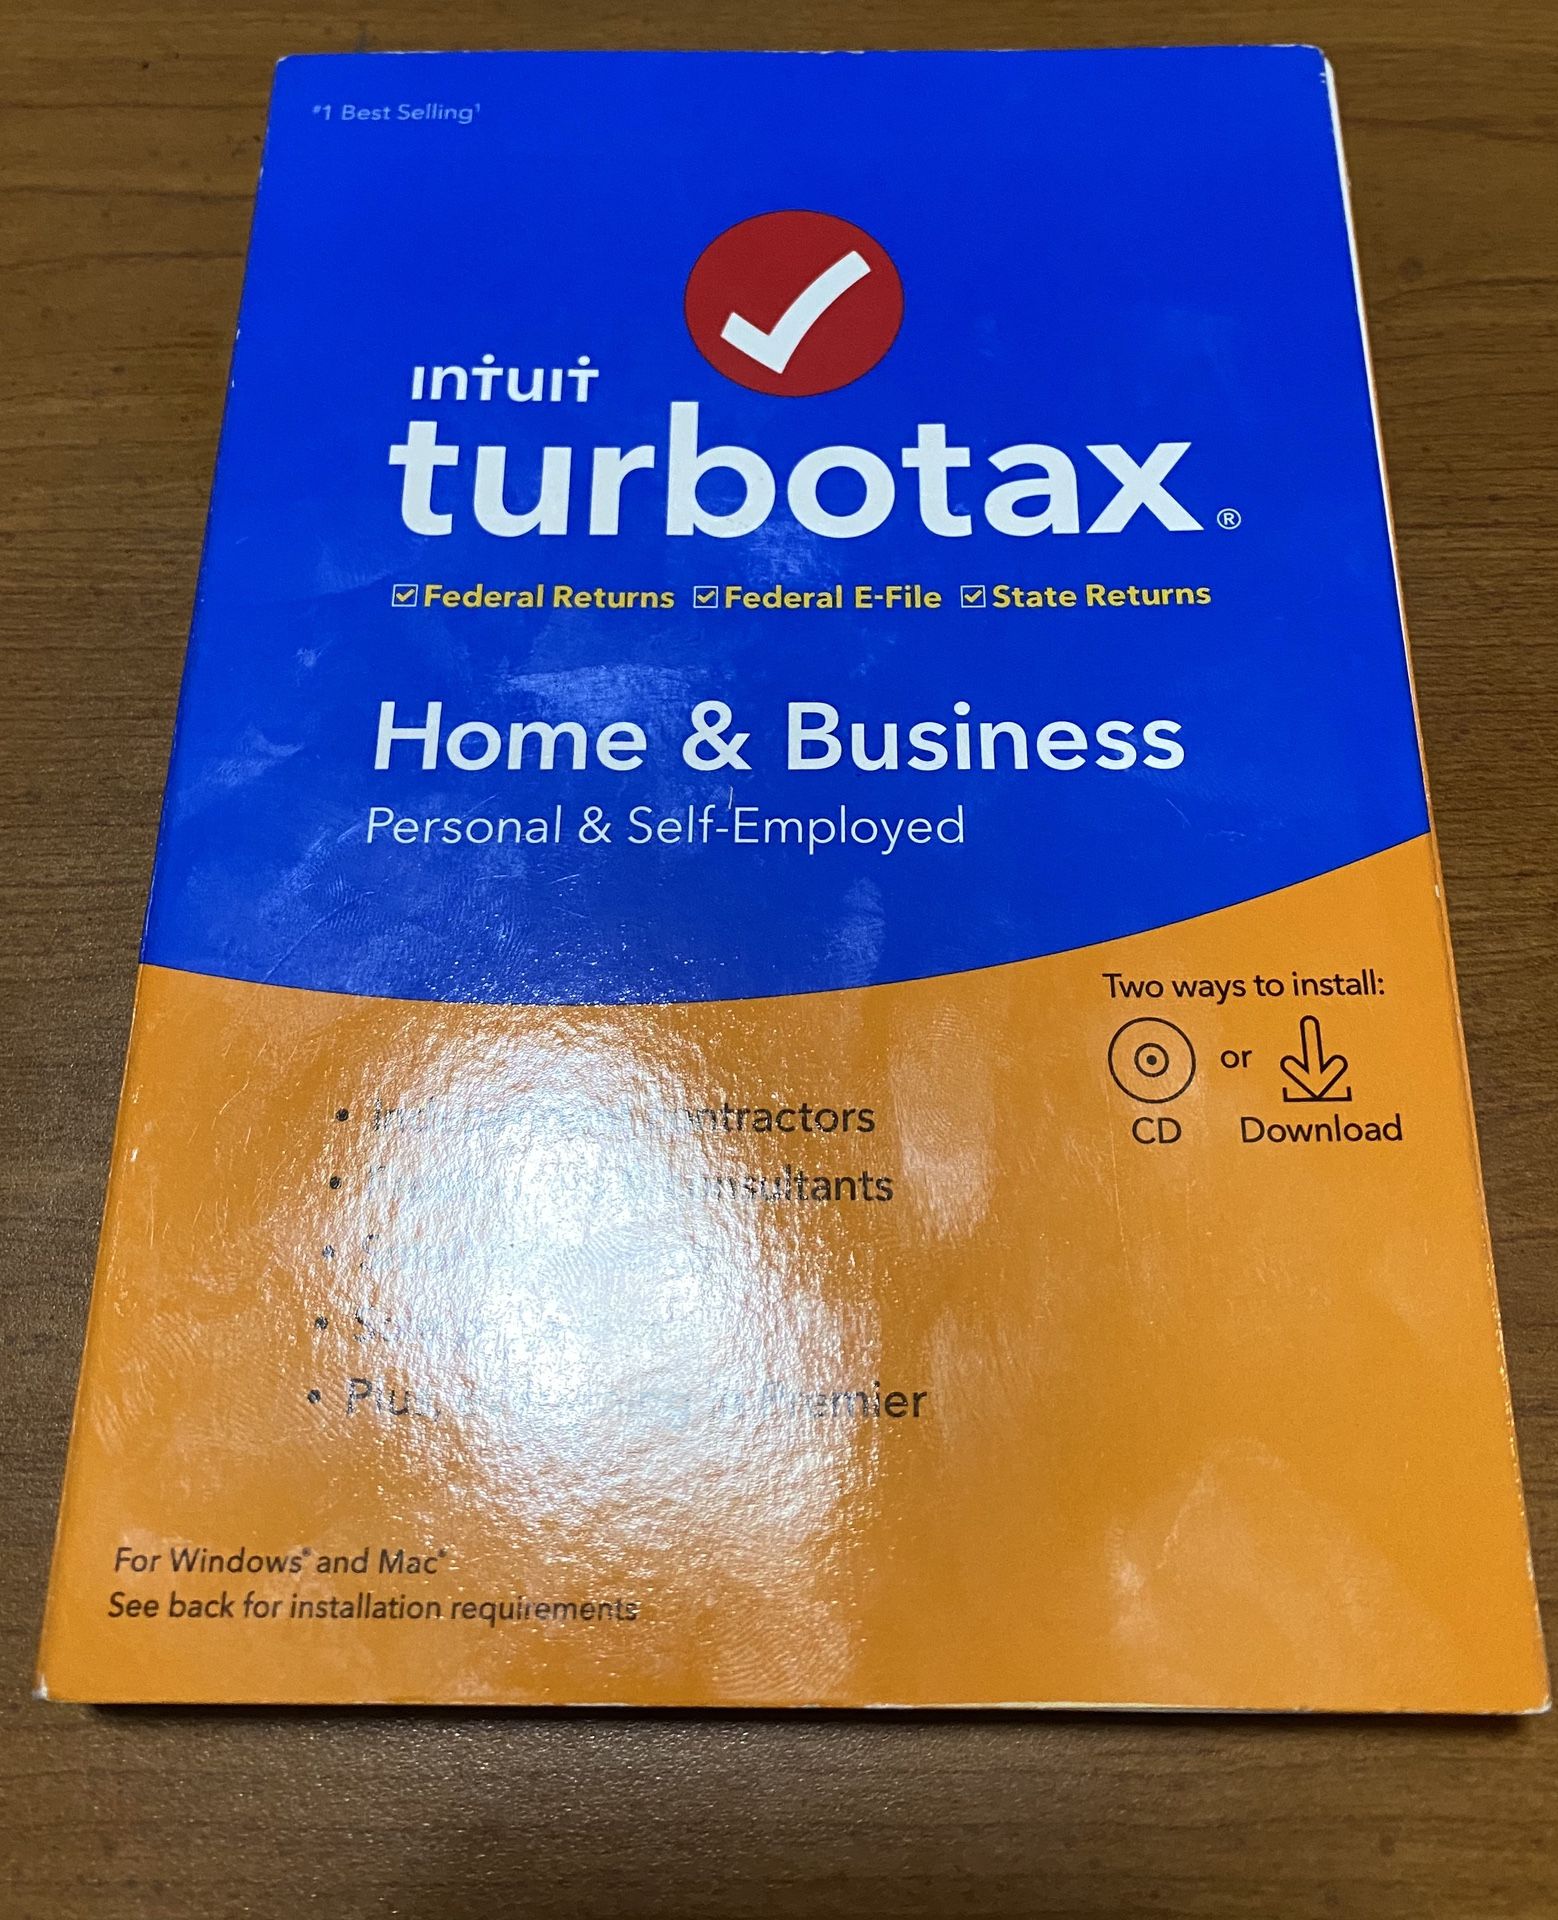 Intuit TurboTax Home & Business 2019